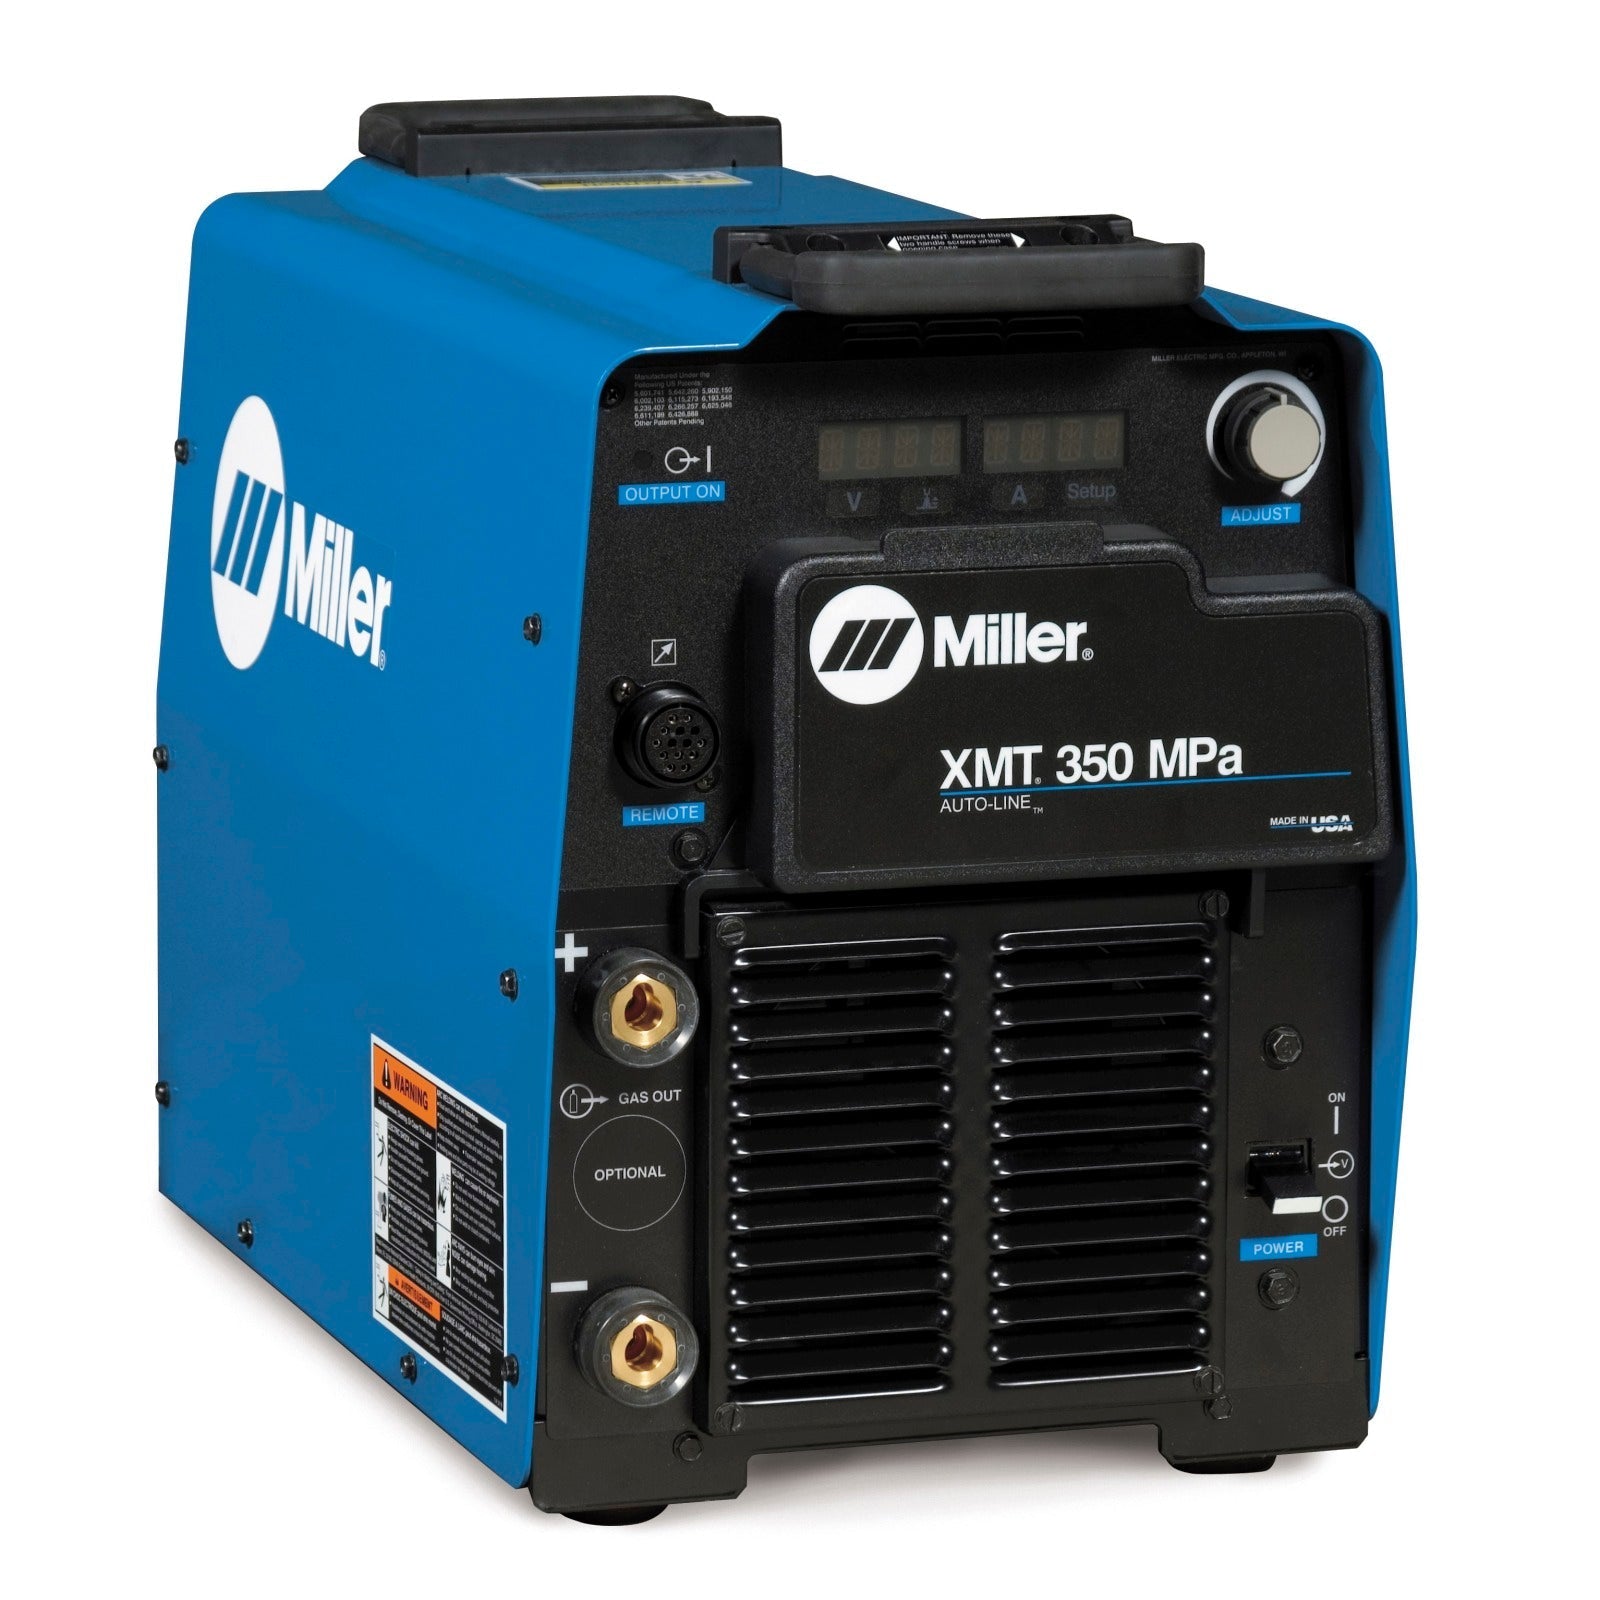 Miller XMT 350 MPa Multiprocess Welder with Auxiliary Power (907366011)